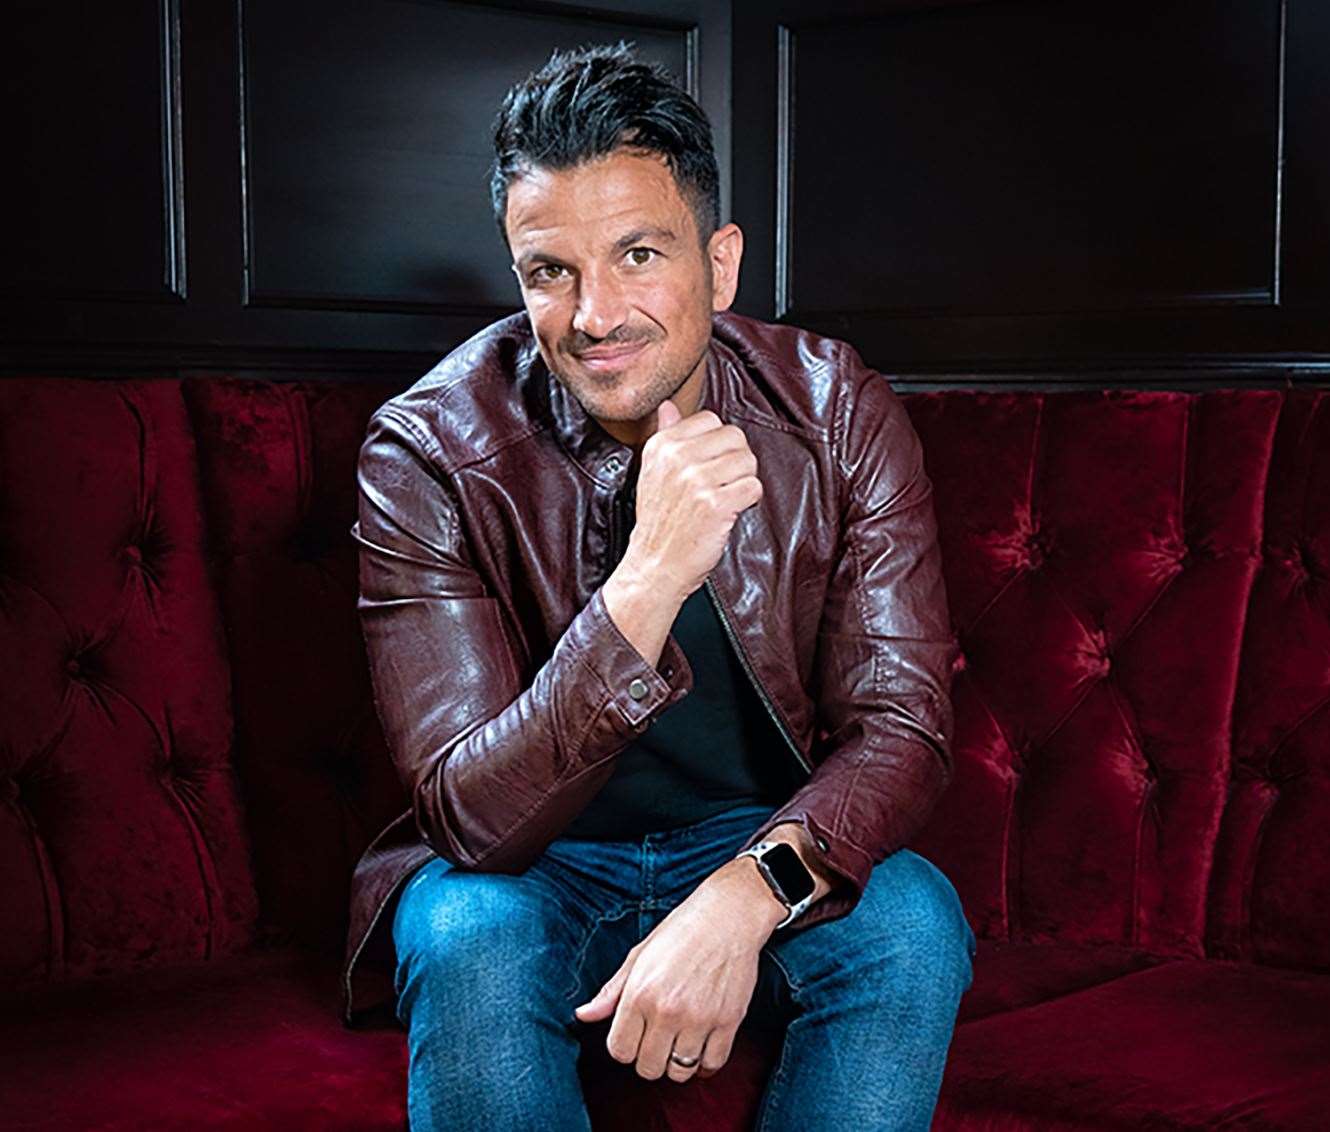 '90s heartthrob Peter Andre is headlining the Gravesham Riverside Festival. Picture: Ant Robling